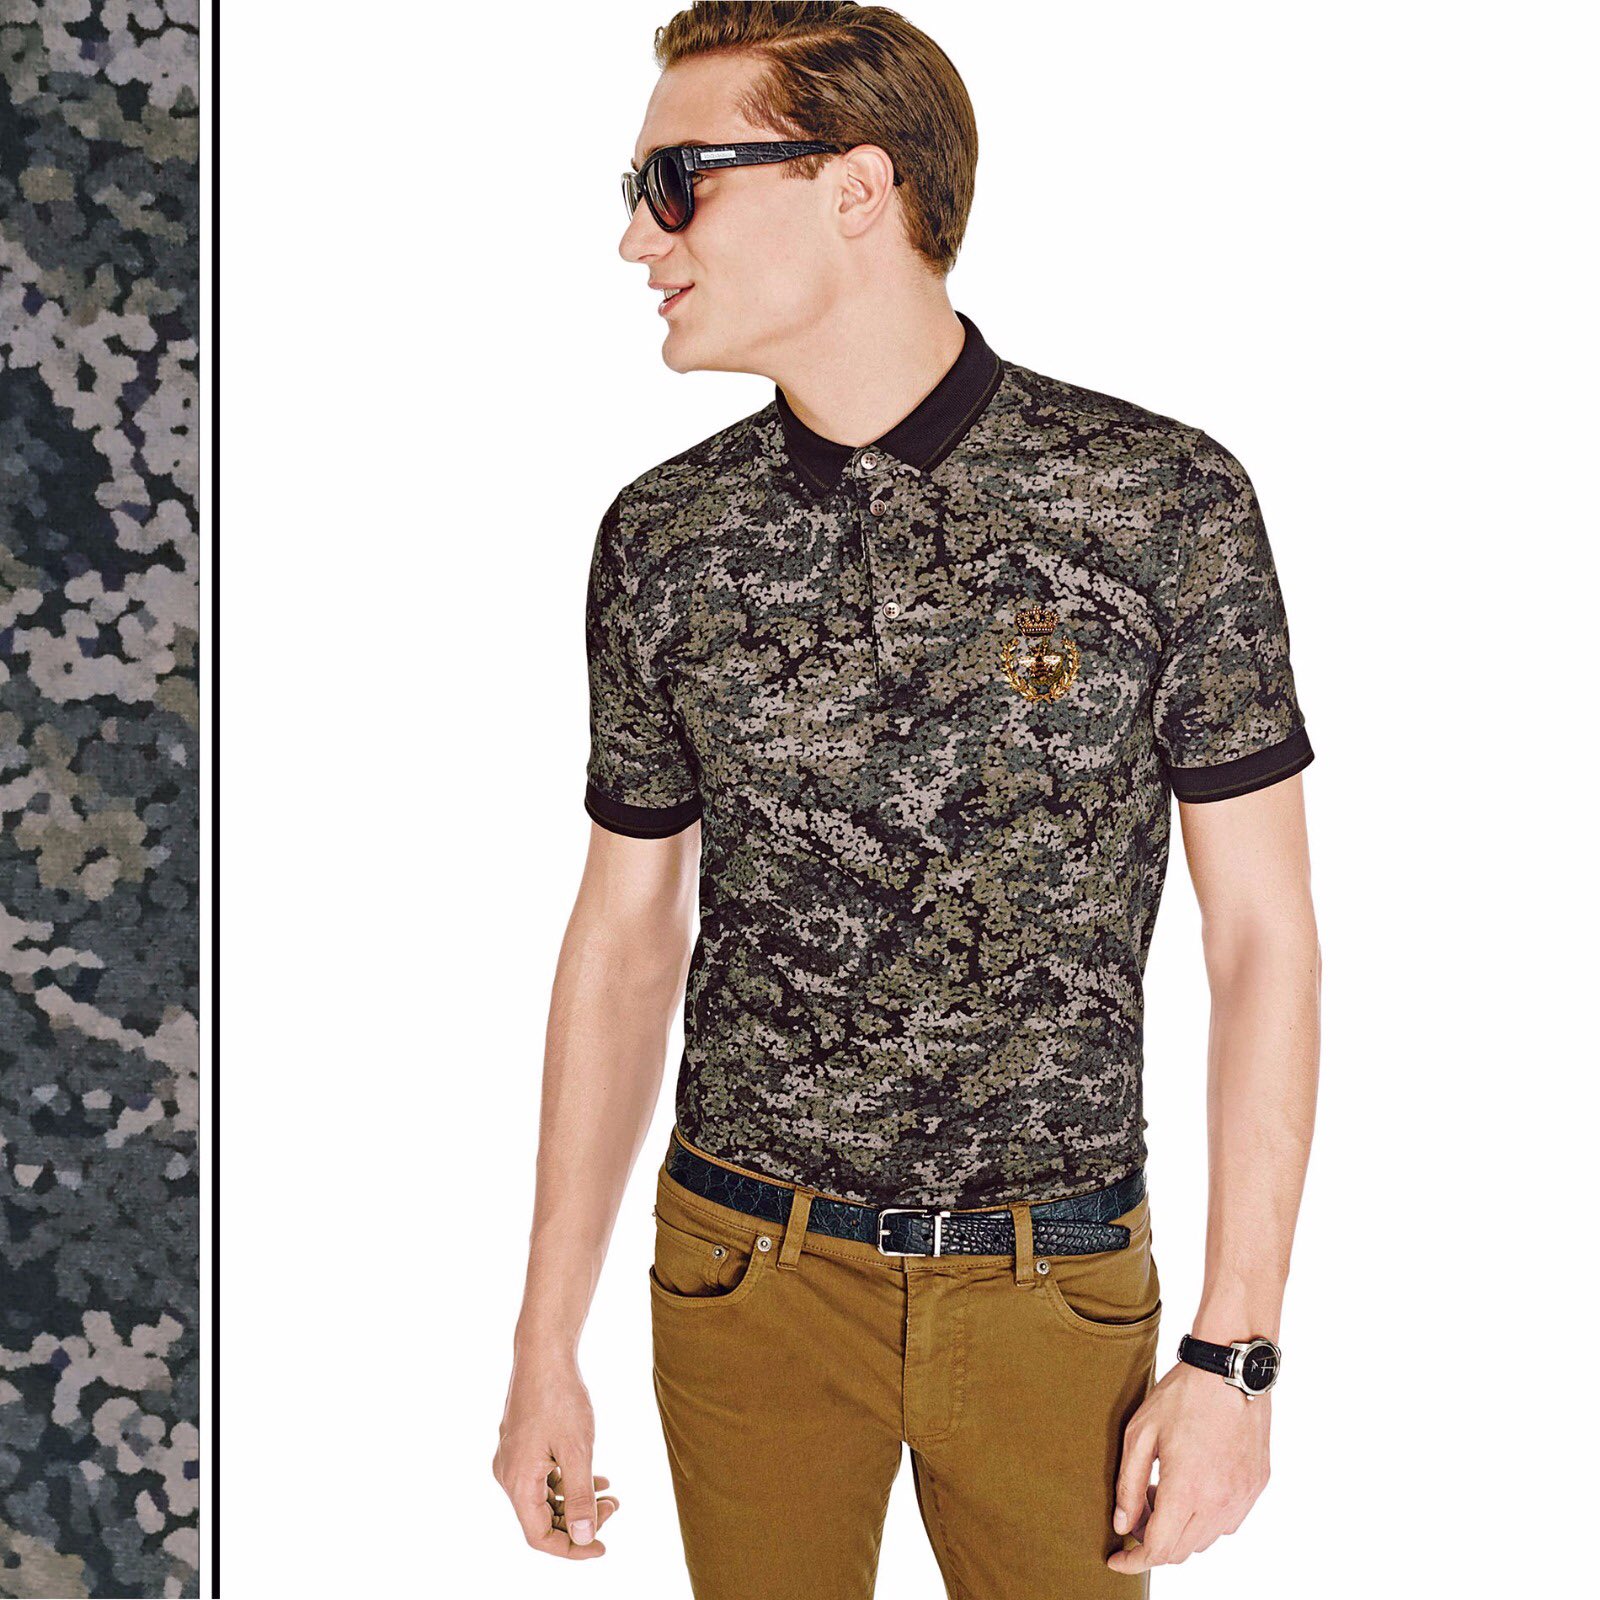 Dolce & Gabbana on Twitter: "#DGCAMOUFLAGE print is the perfect choice